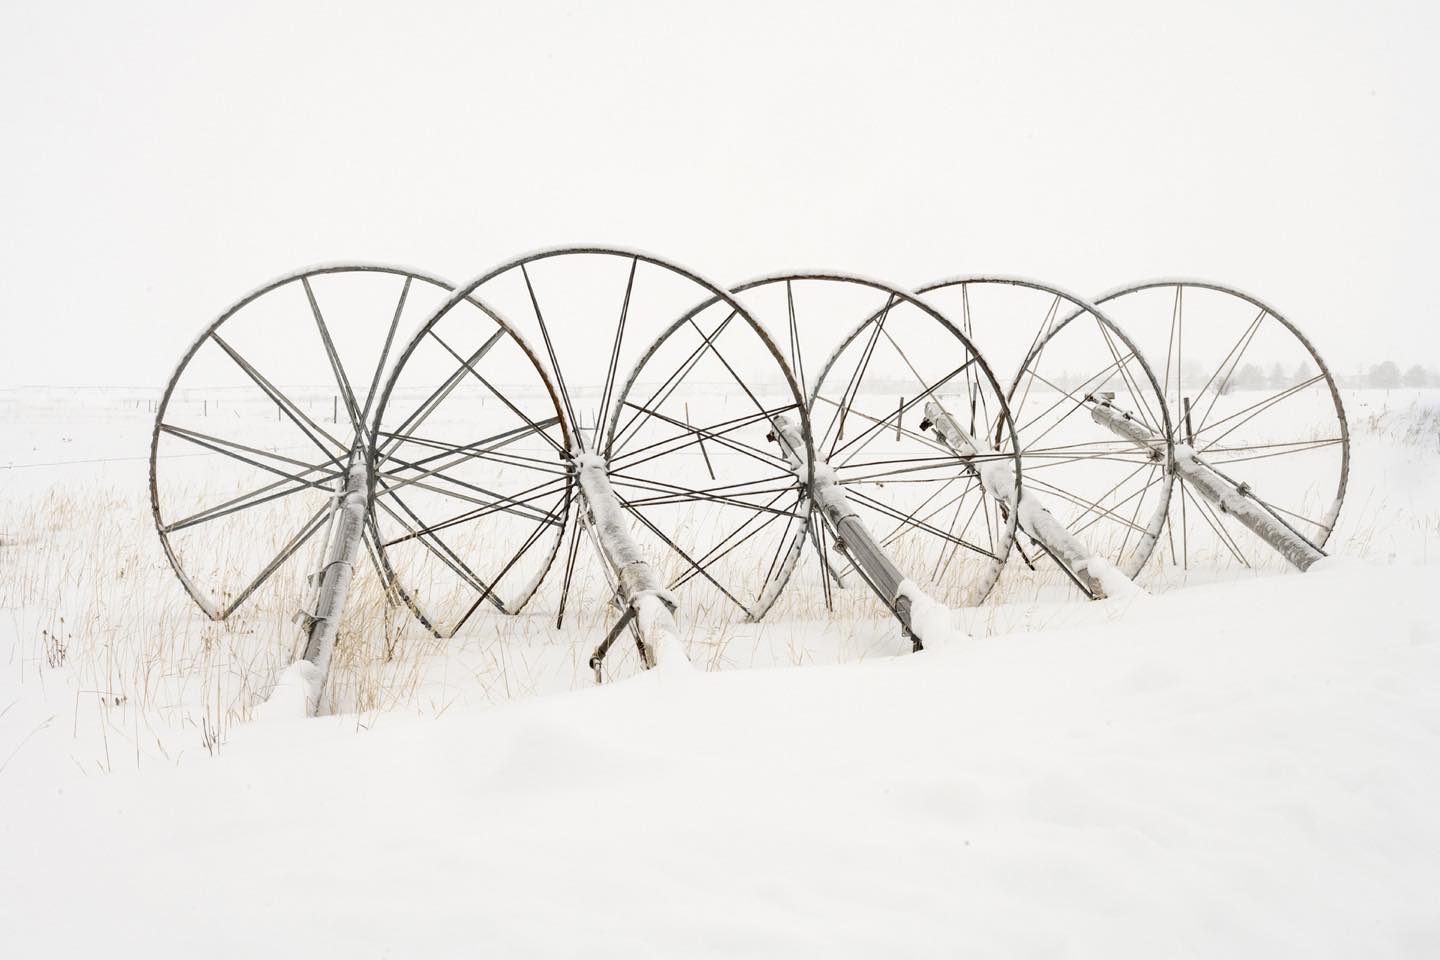 Wheel Line parts in Driggs, Idaho. When assembled during the growing seasons these wheels and pipes form long lines that move across the landscape, irrigating field crops. Stored at the edges of fields in winter, they provide great subjects for photo art! #driggsidago #bestofthegemstate #wheellines #wheellineart #orcuttphotography tetonvalleyidaho